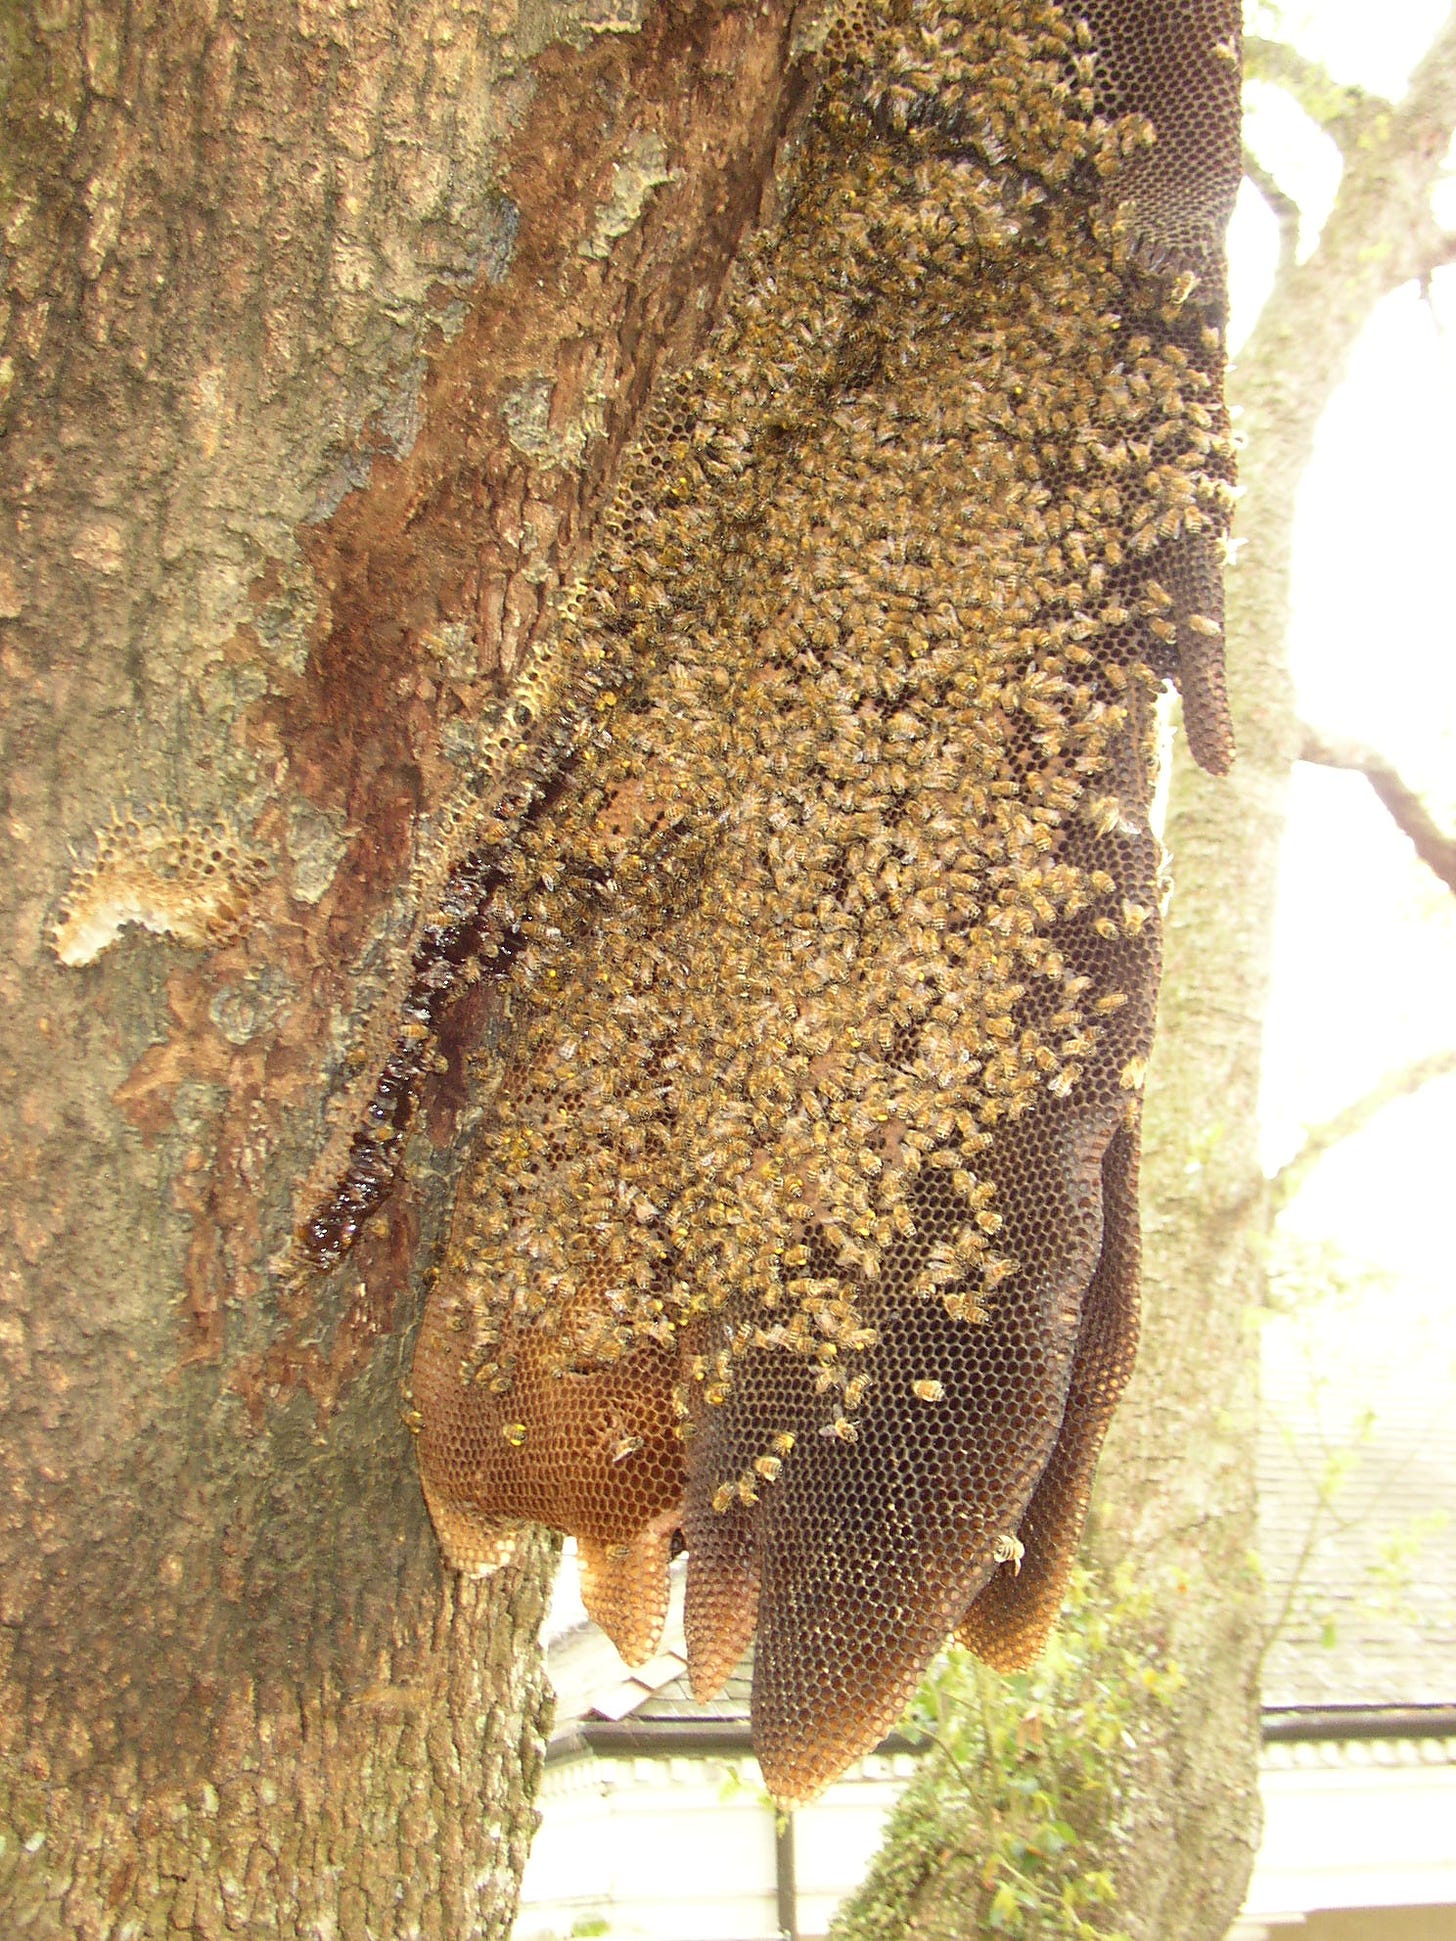 Wild honeybee hive covered in bees. Queen cell on the side.